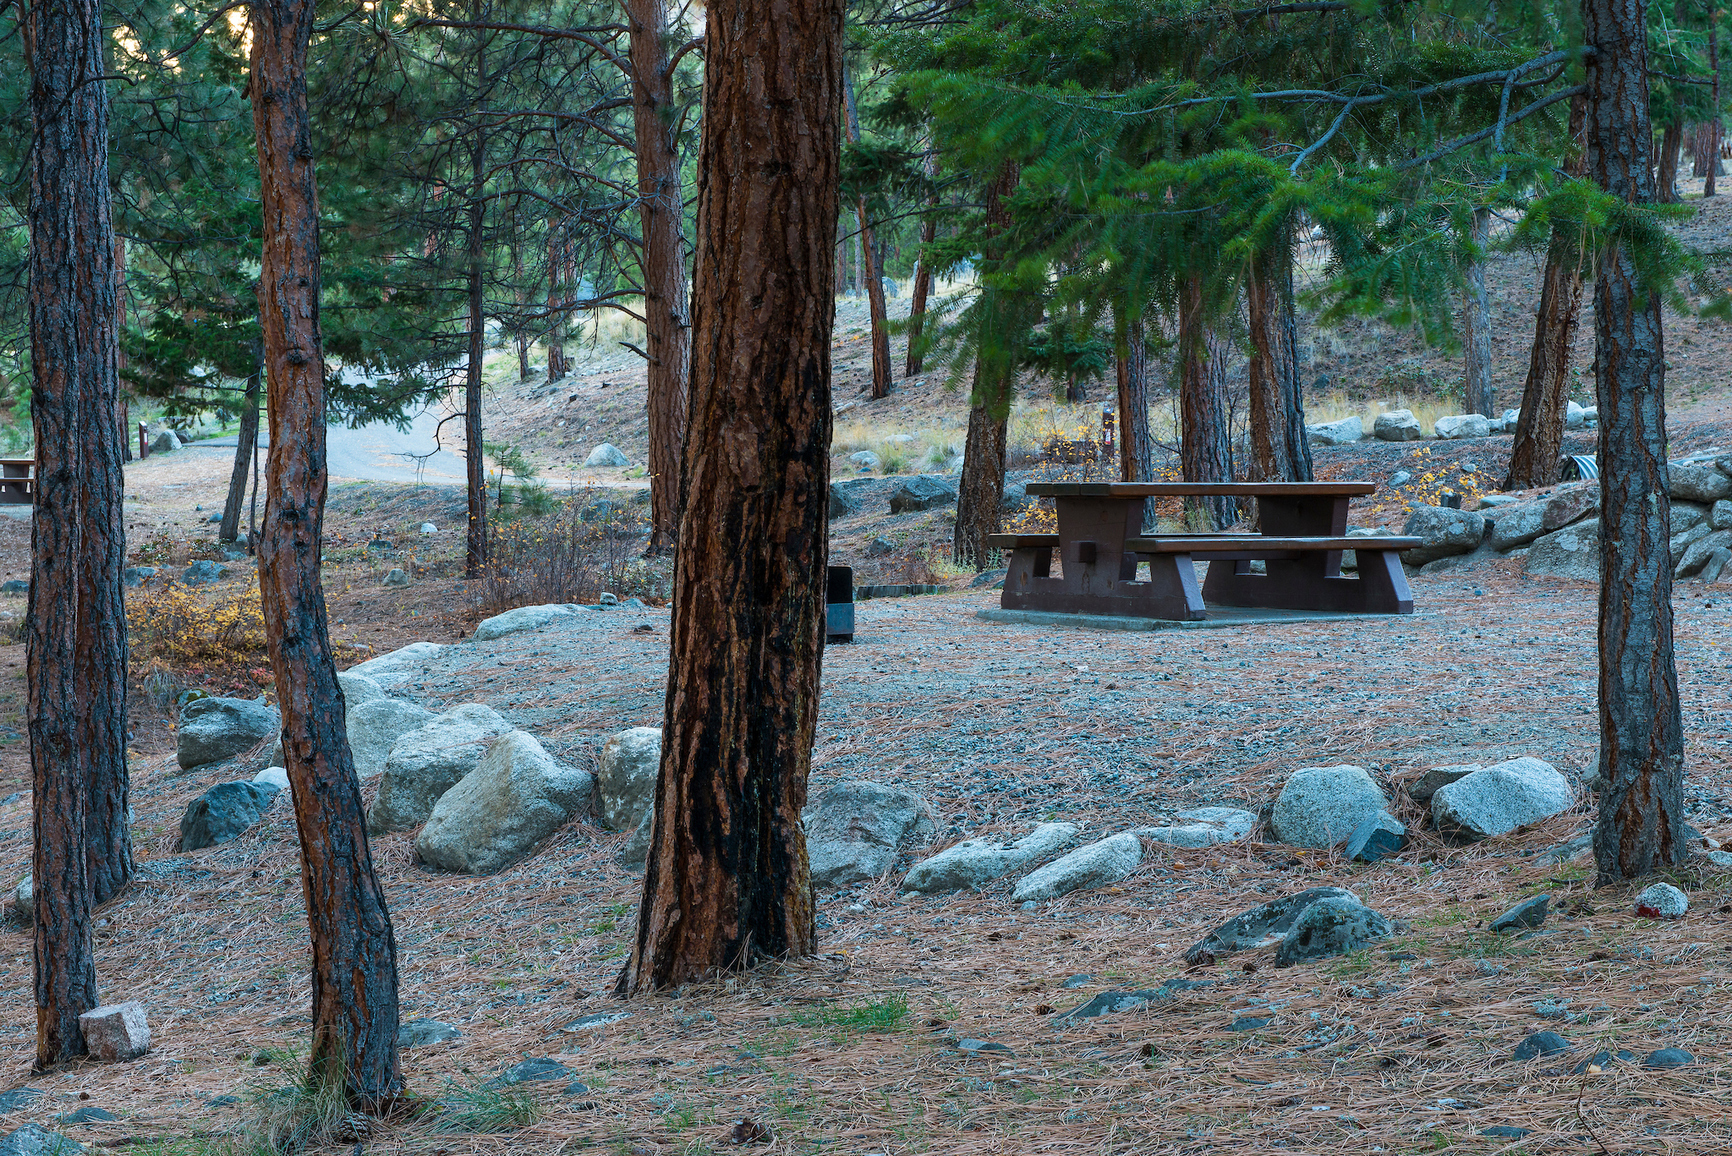 Vacant front-country campground with scattered trees.